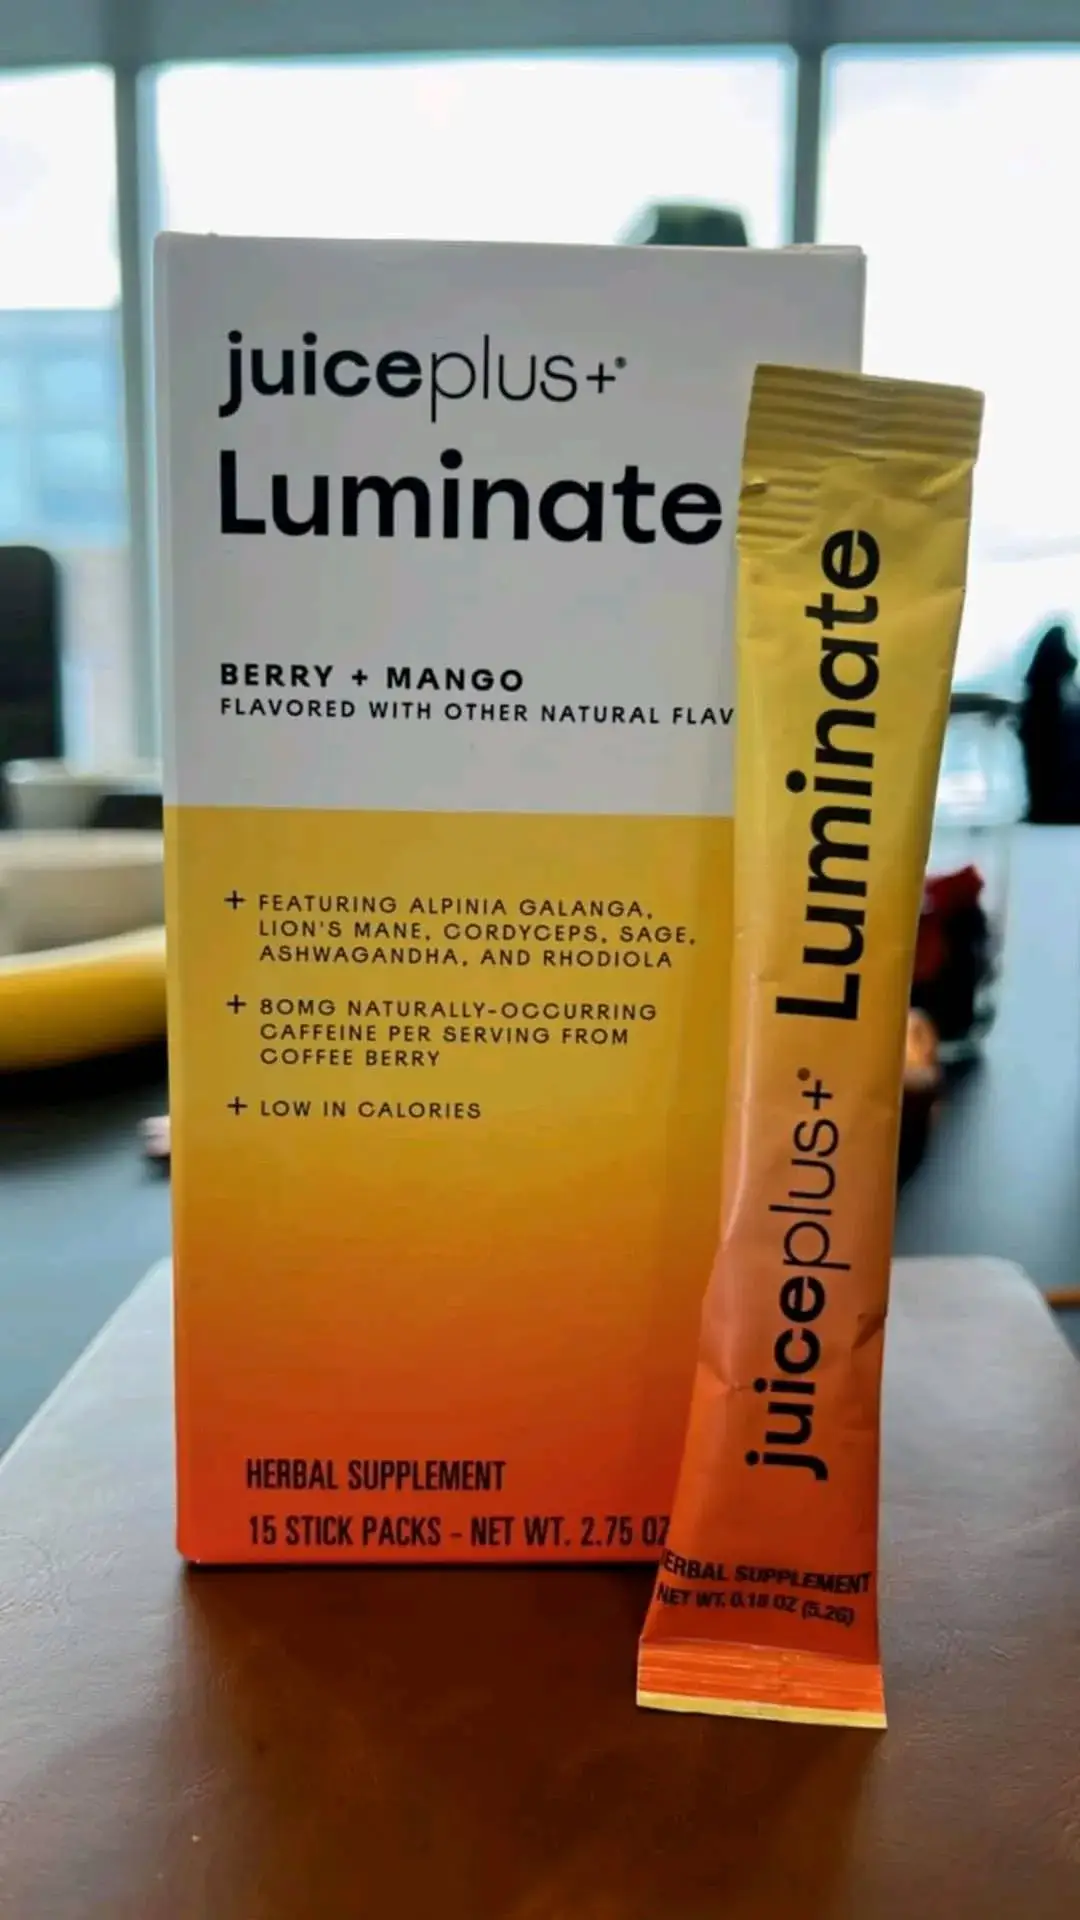 Introducing the new range of JuicePlus products - Luminate! 🌟 Packed with powerful antioxidants and essential nutrients, these products are designed to boost your overall health and wellness. 💪 Say hello to glowing skin, increased energy, and improved digestion! Get ready to shine with Luminate by JuicePlus! ✨ #Luminate #JuicePlus #HealthandWellness #NewProducts #HealthyLiving #newproductscomingsoon @chatelier mie lourdi 